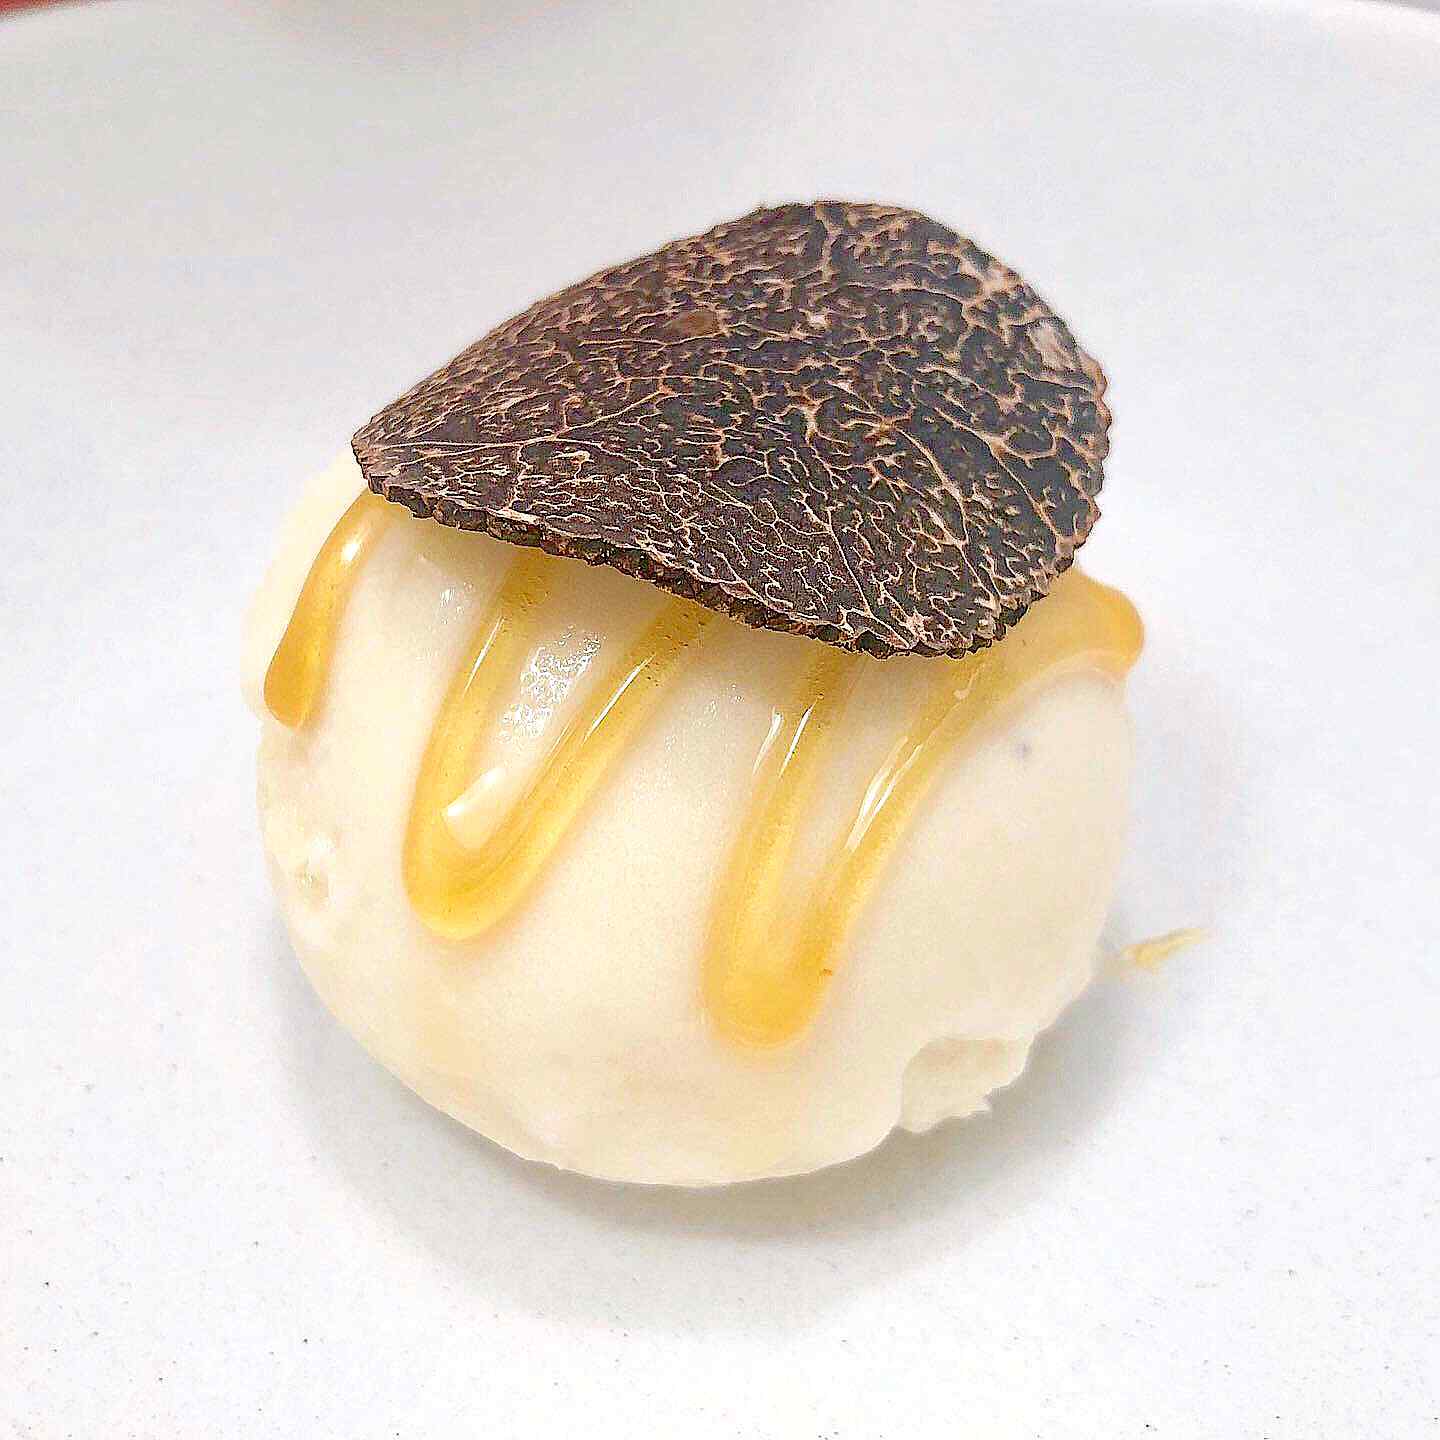 white chocolate sorbet with truffle and honey